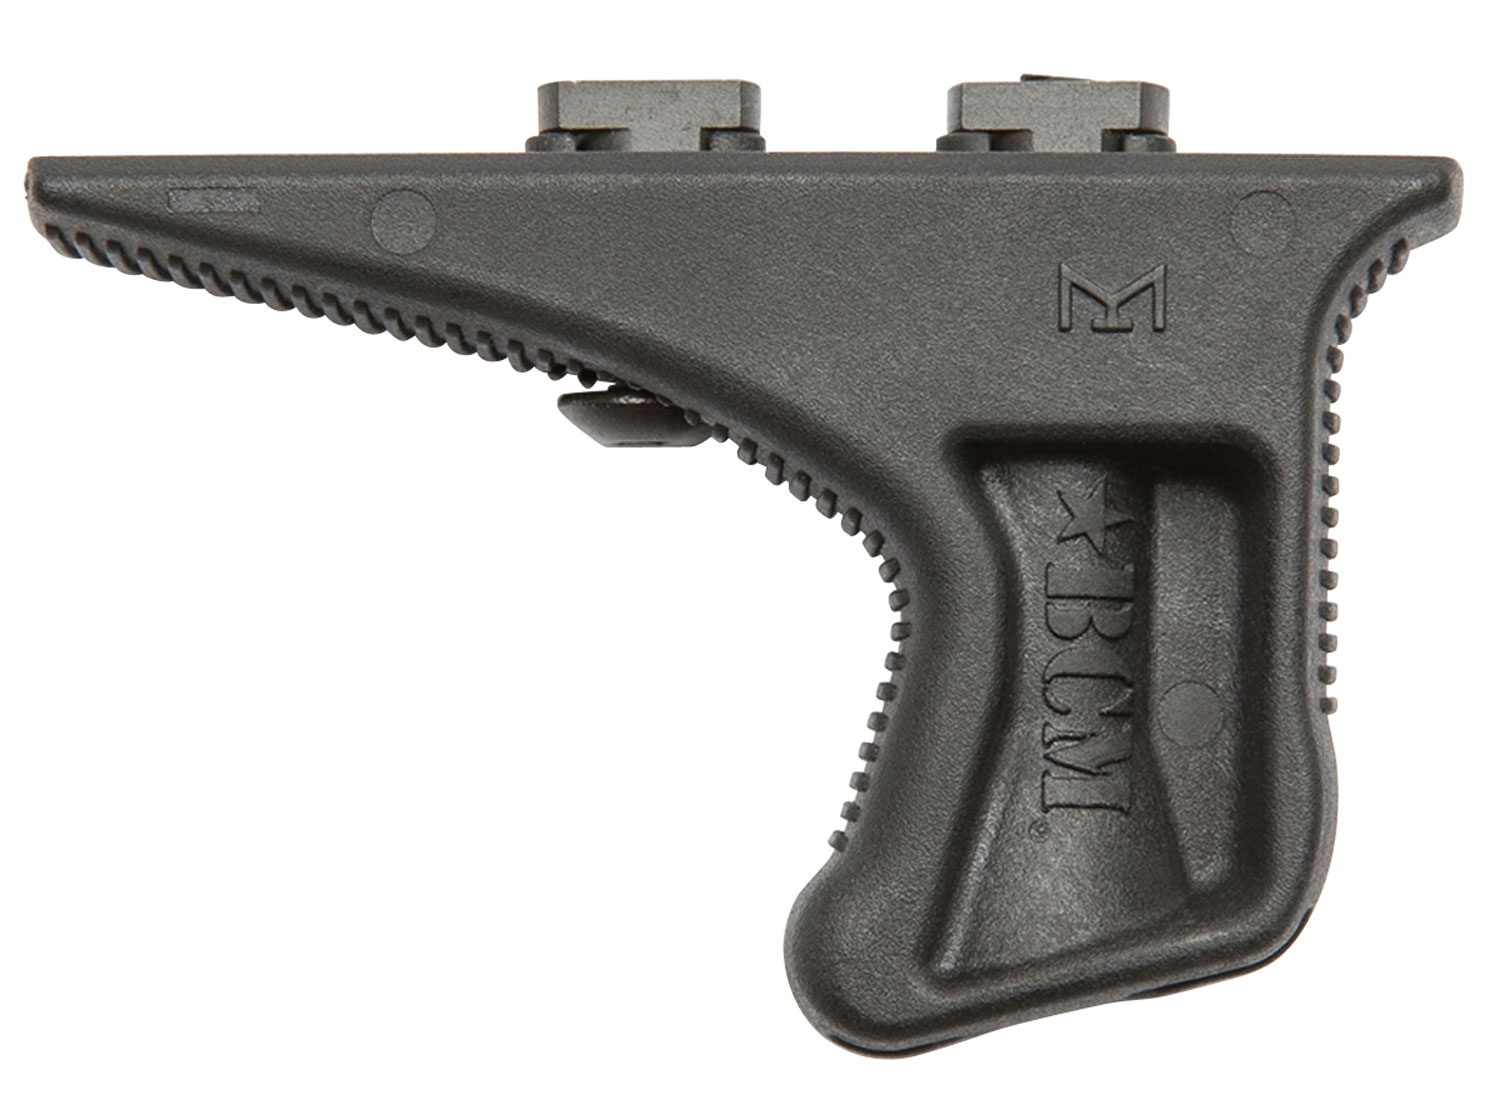 BCM KAGMCMRBLK BCMGunfighter Kinesthetic Angled Grip MOD 3 Made of Polymer With Black Finish for M-Lok Rail